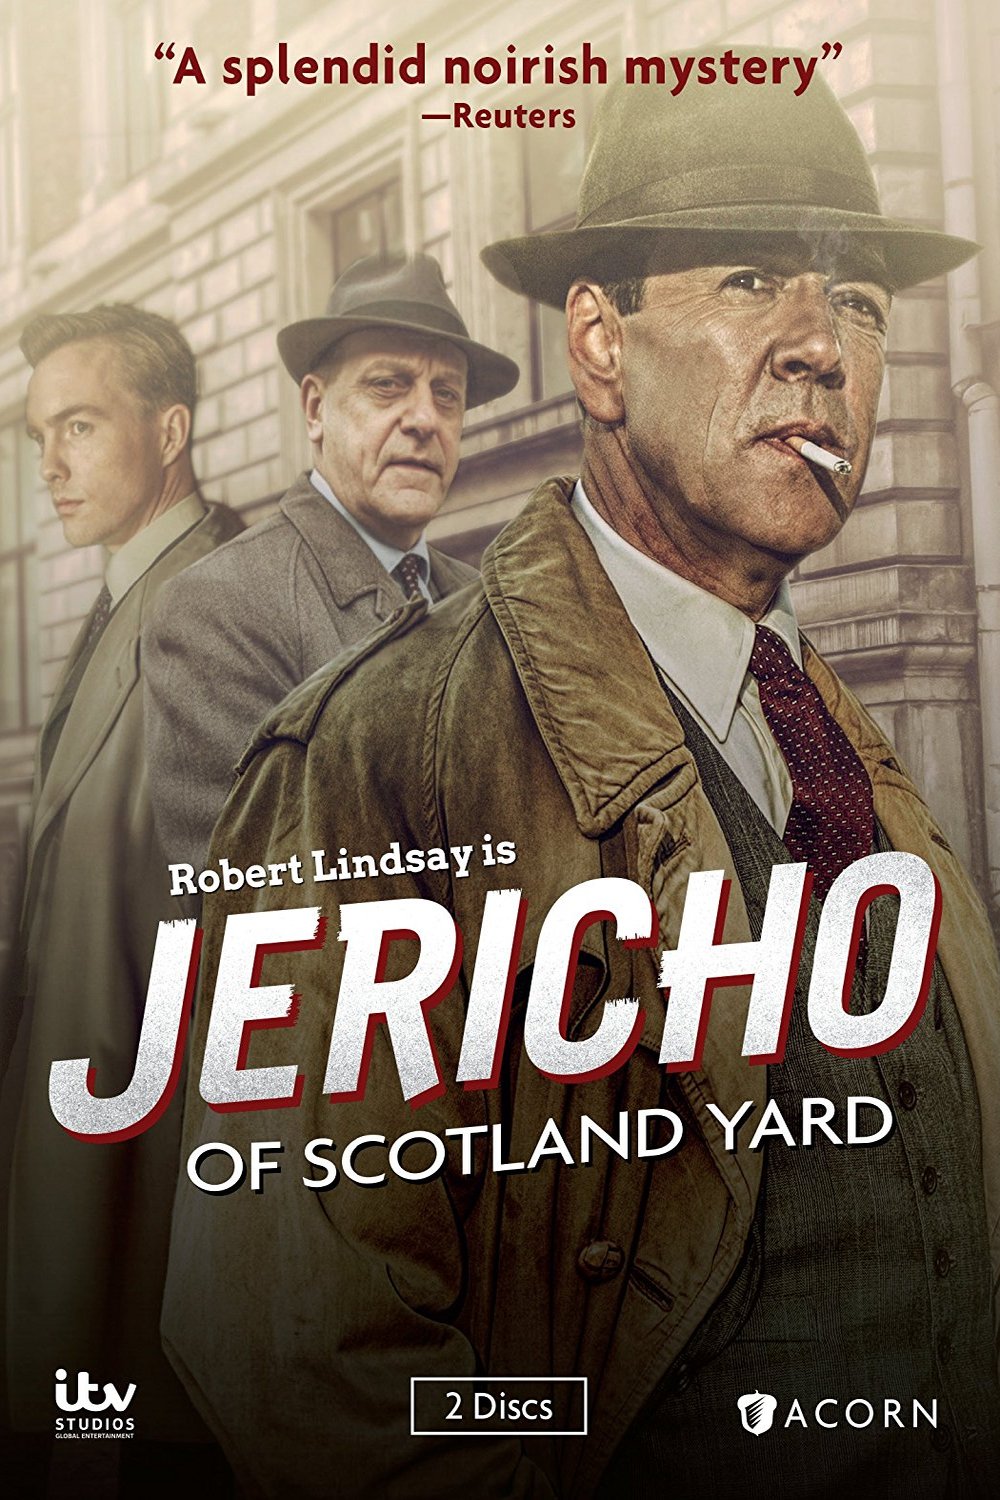 Poster of the movie Jericho of Scotland Yard